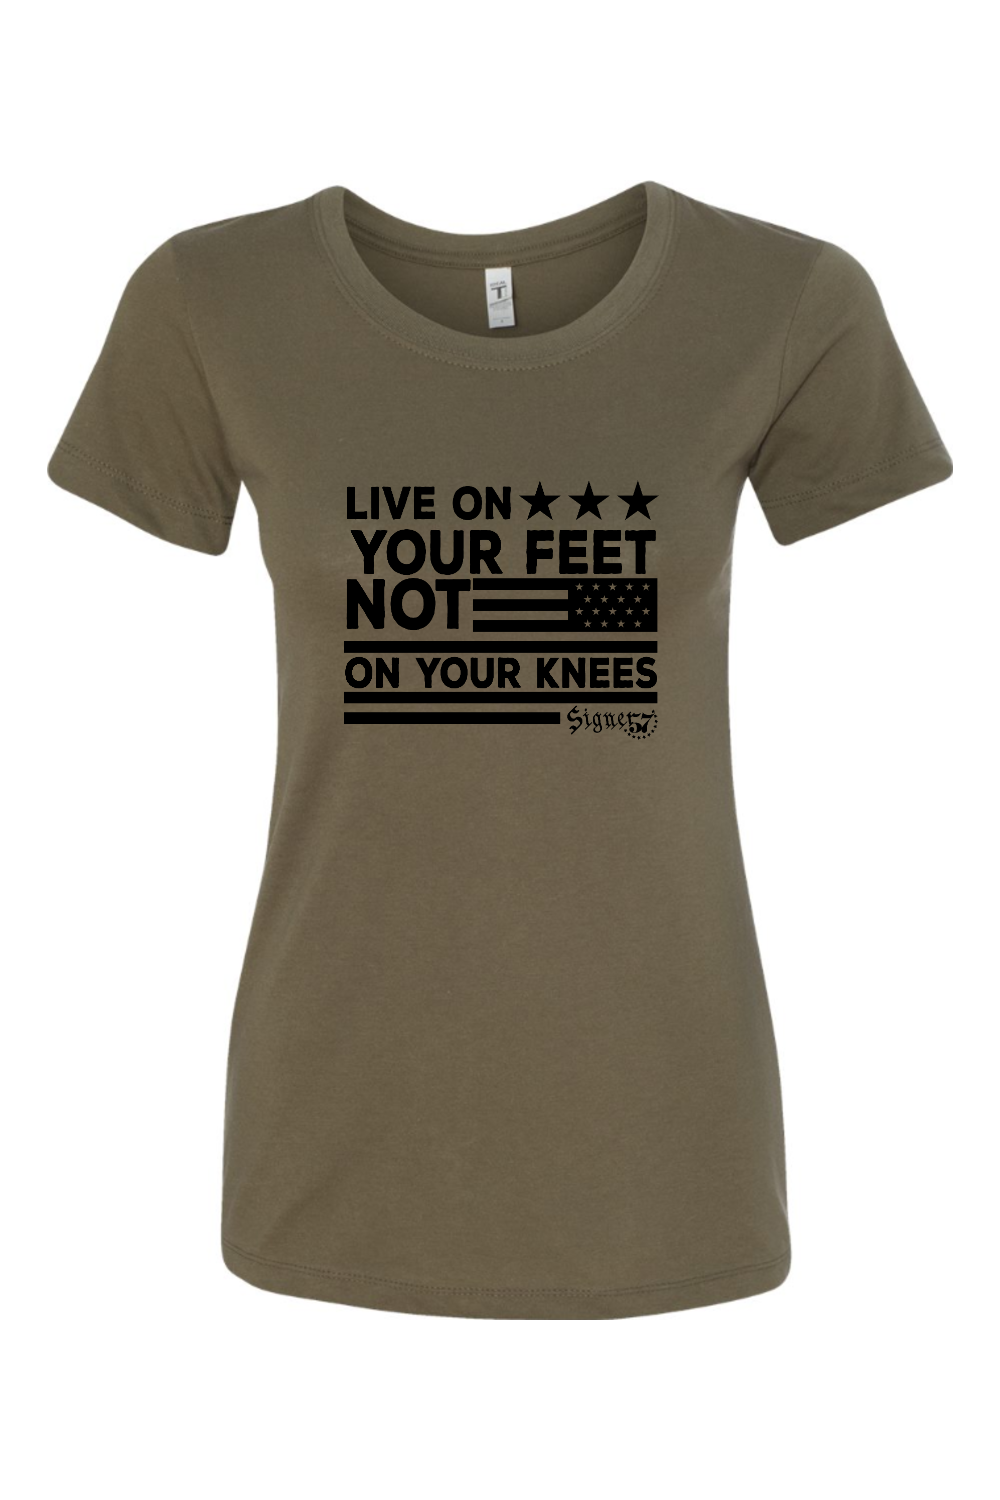 Women's T-Shirt - Live On Your Feet Not On Your Knees